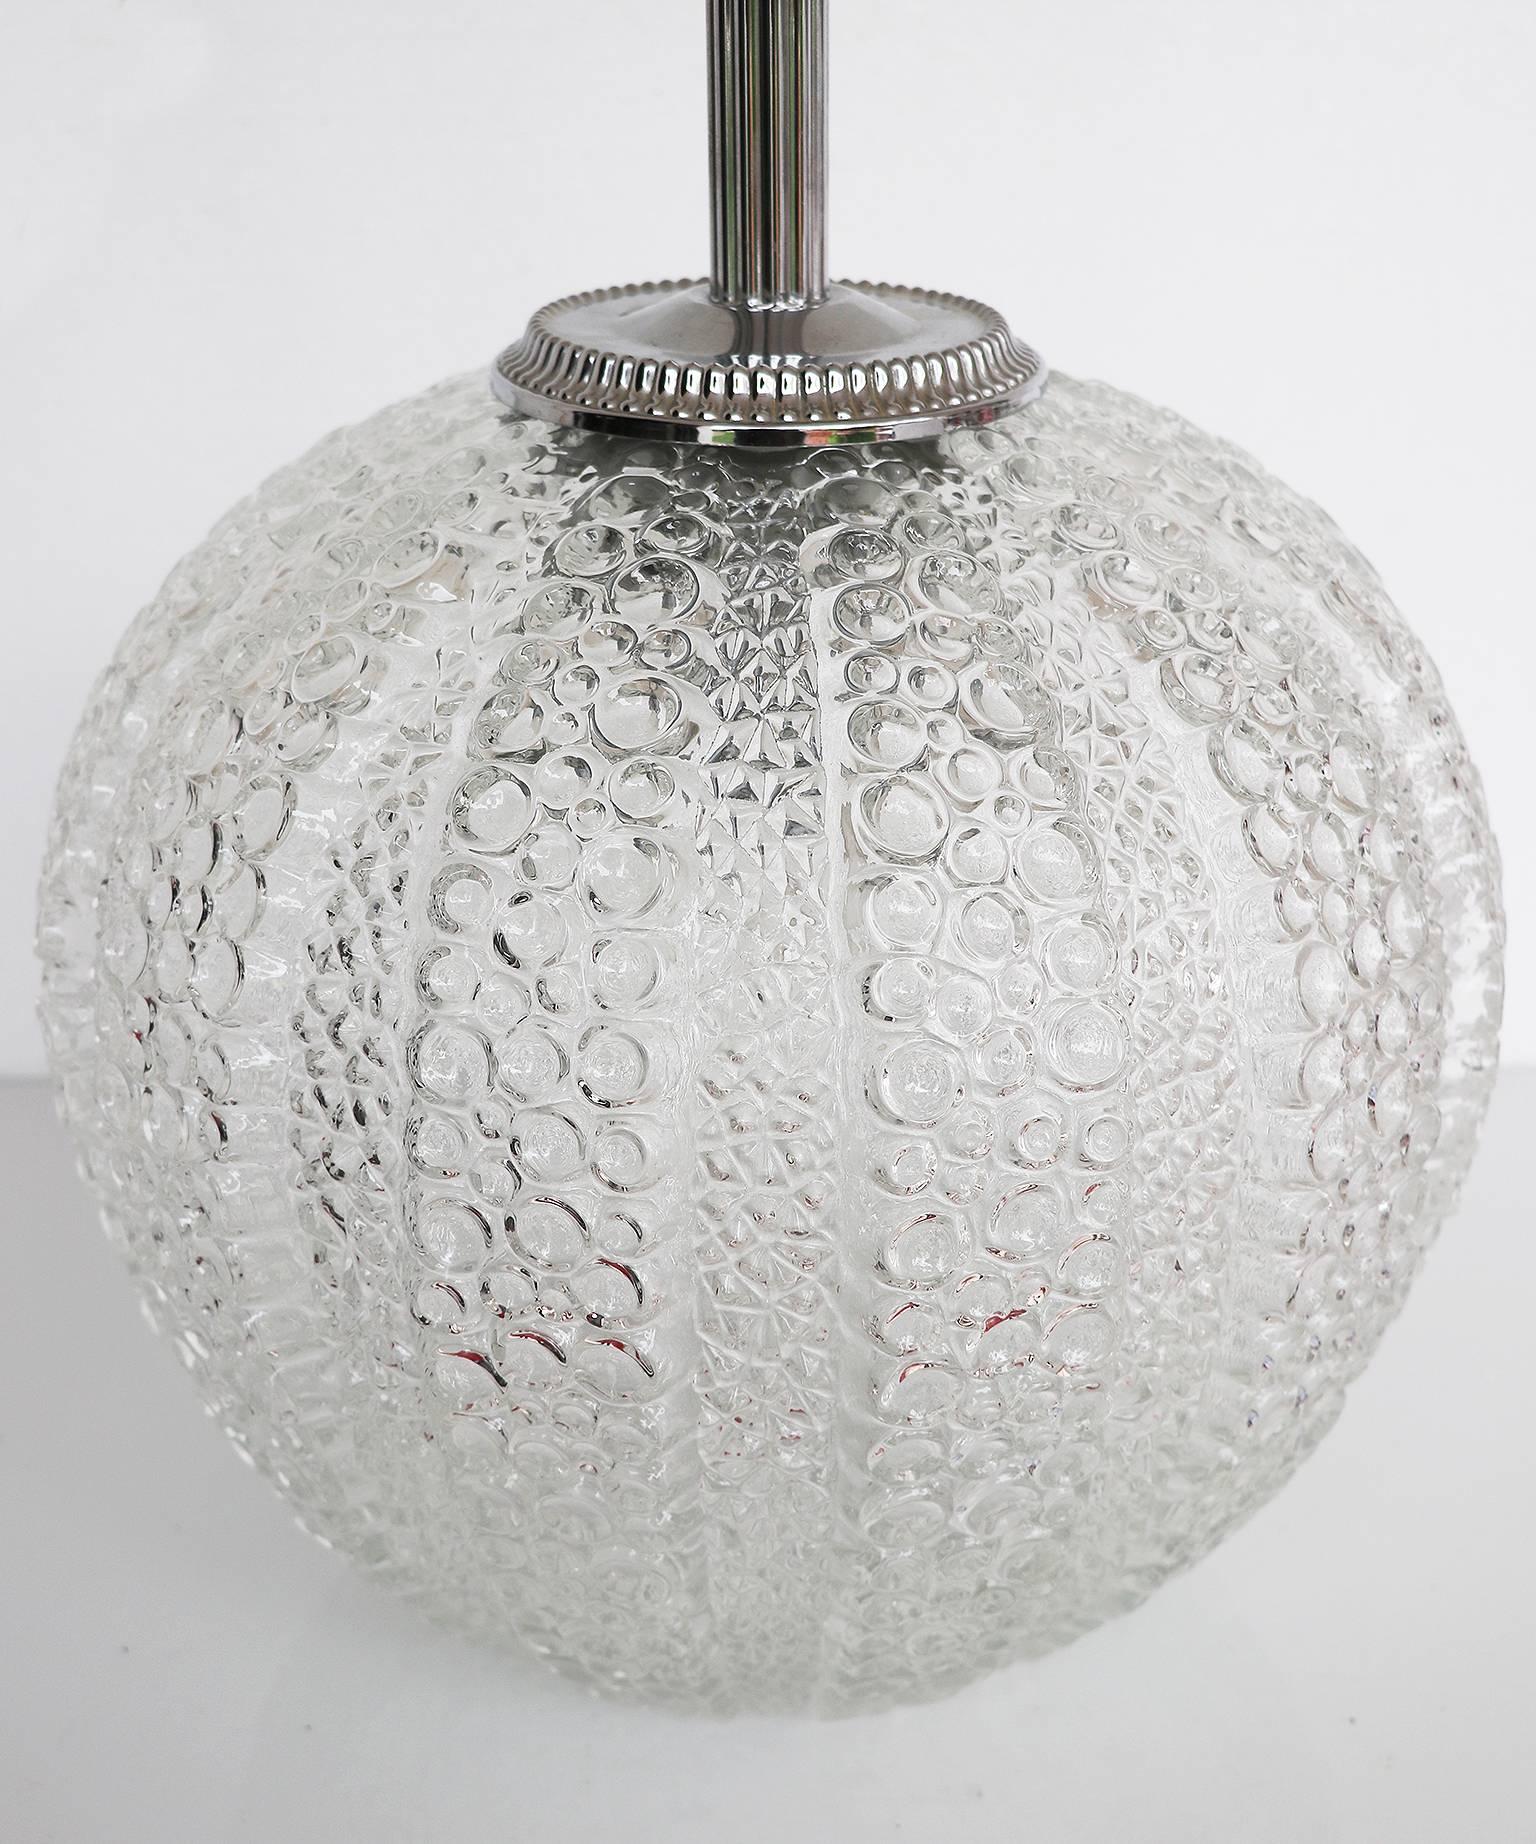 Mid-20th Century Bubble Glass Floor Lamp by Hustadt, Germany 1960s For Sale